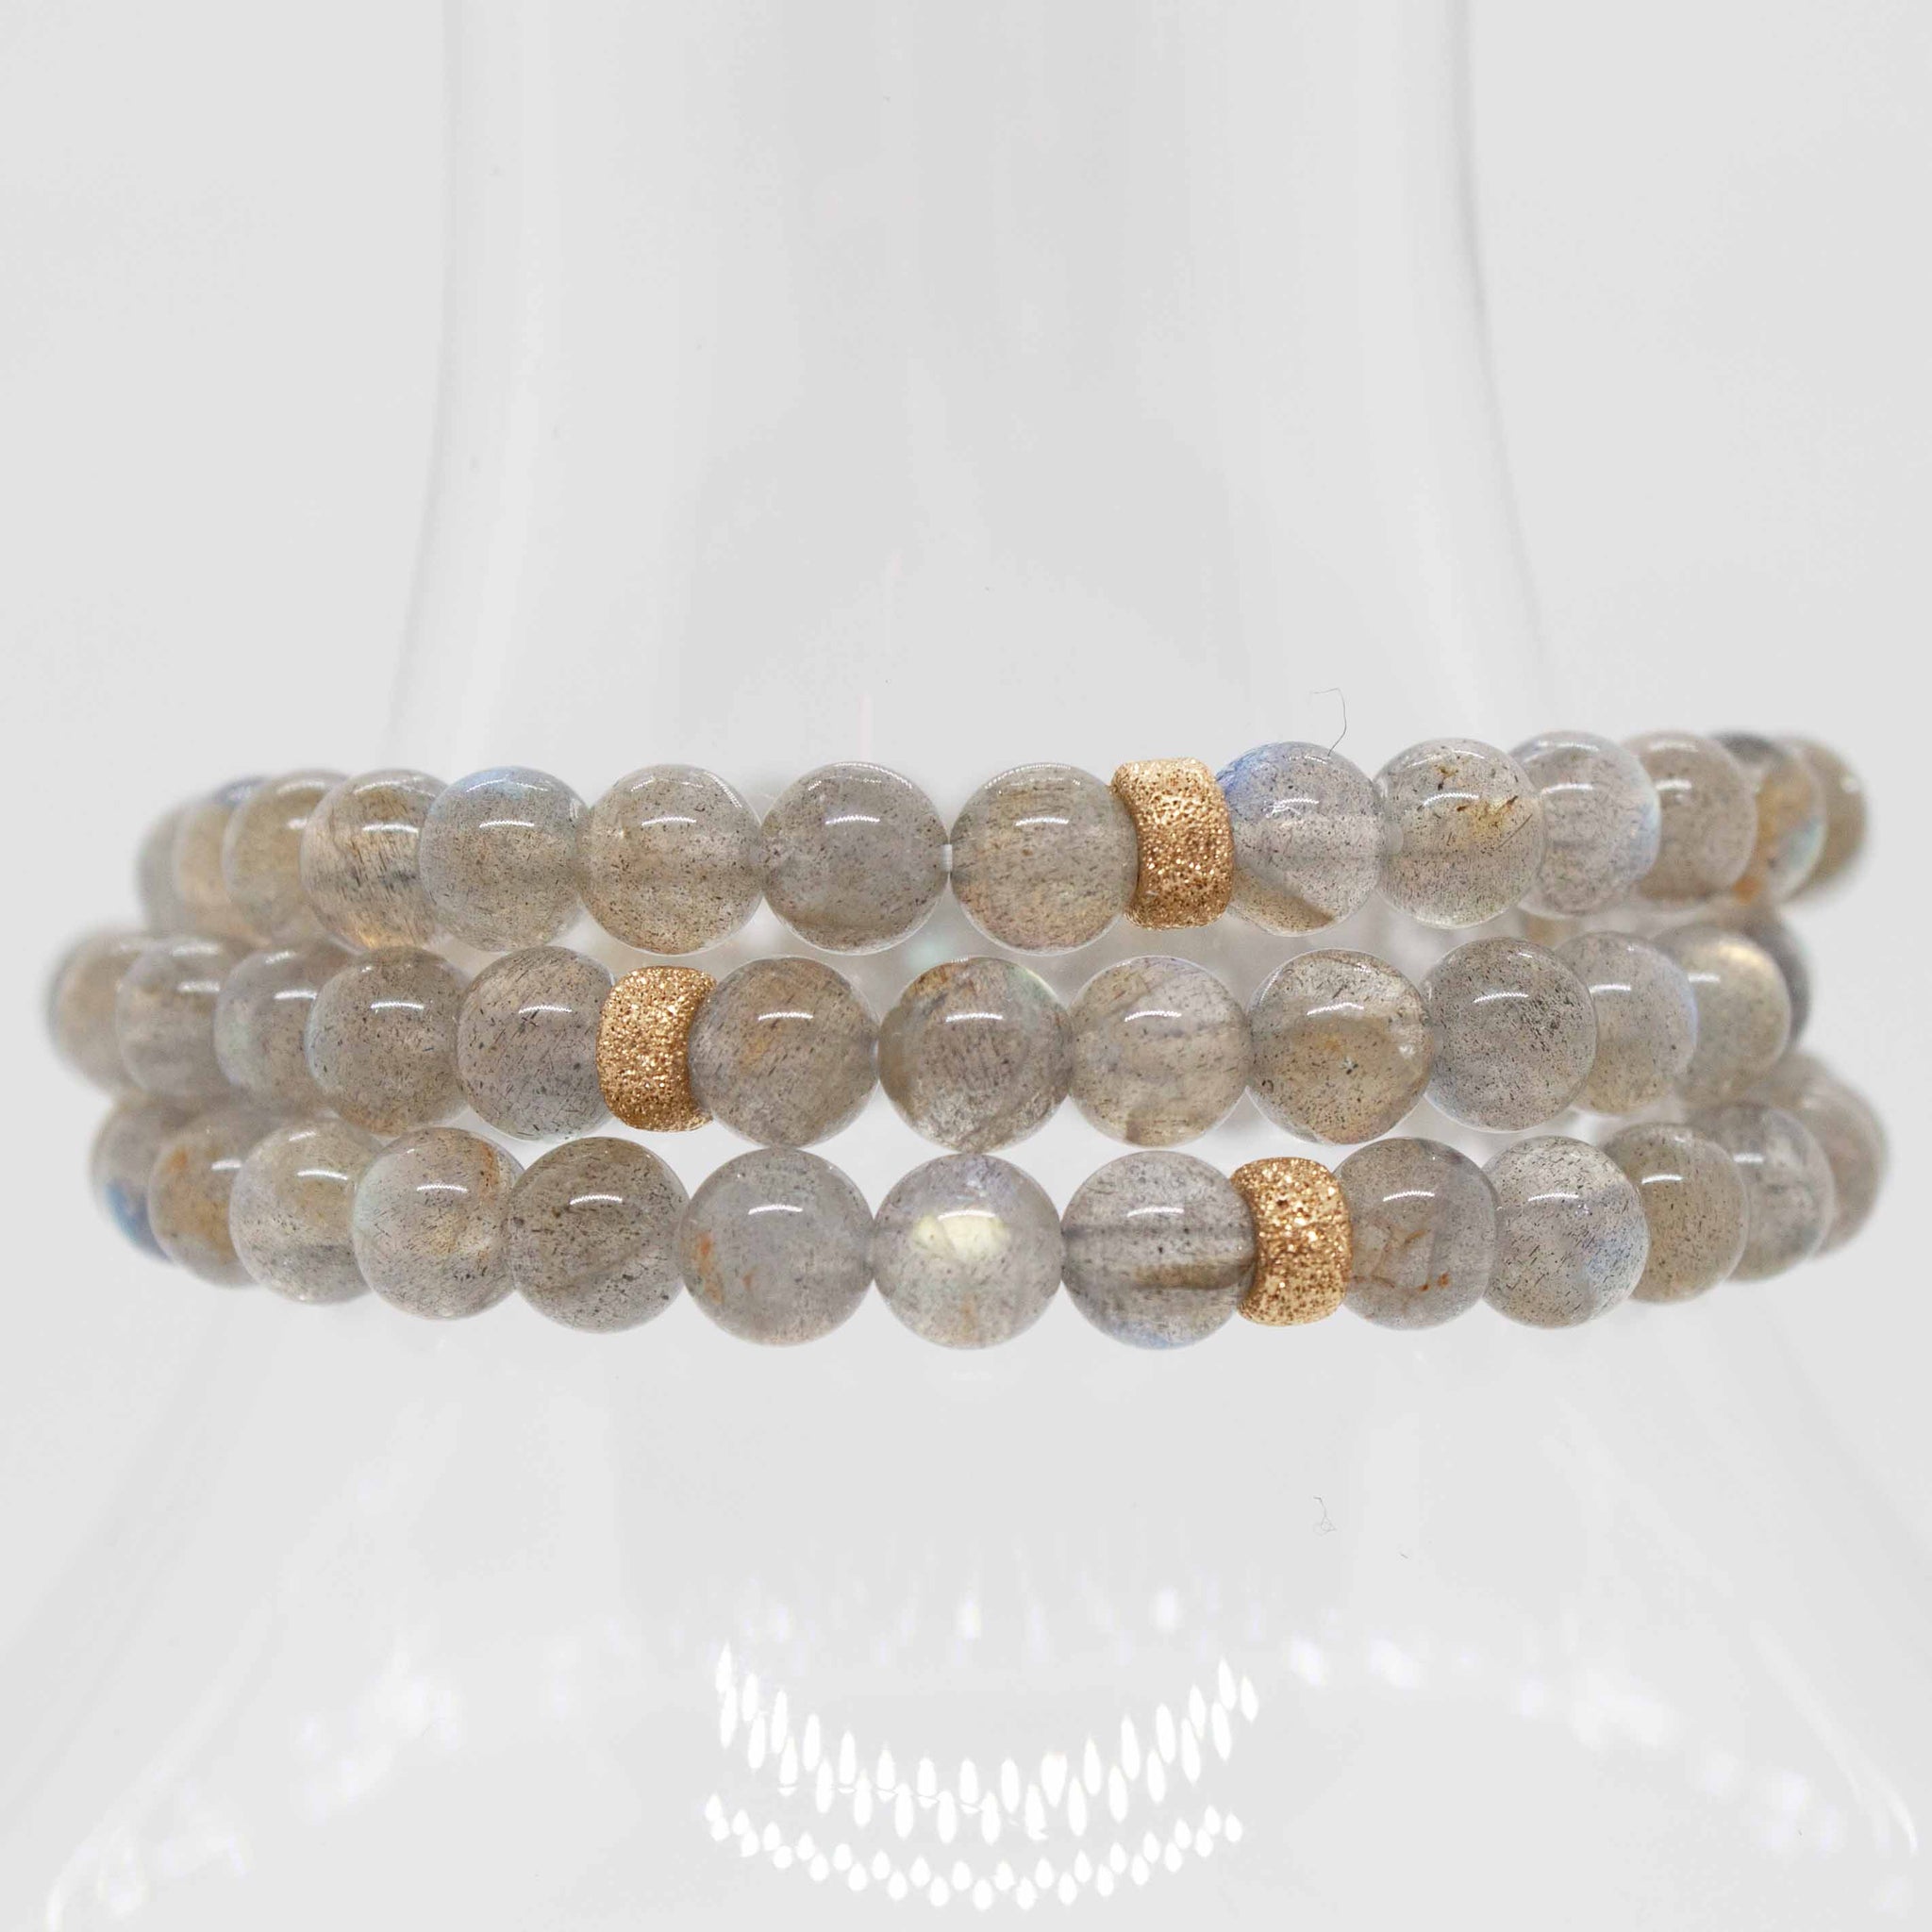 7 inch beaded labradorite stretchy bracelet with 14 karat gold accent bead, double strung with silk elastic.